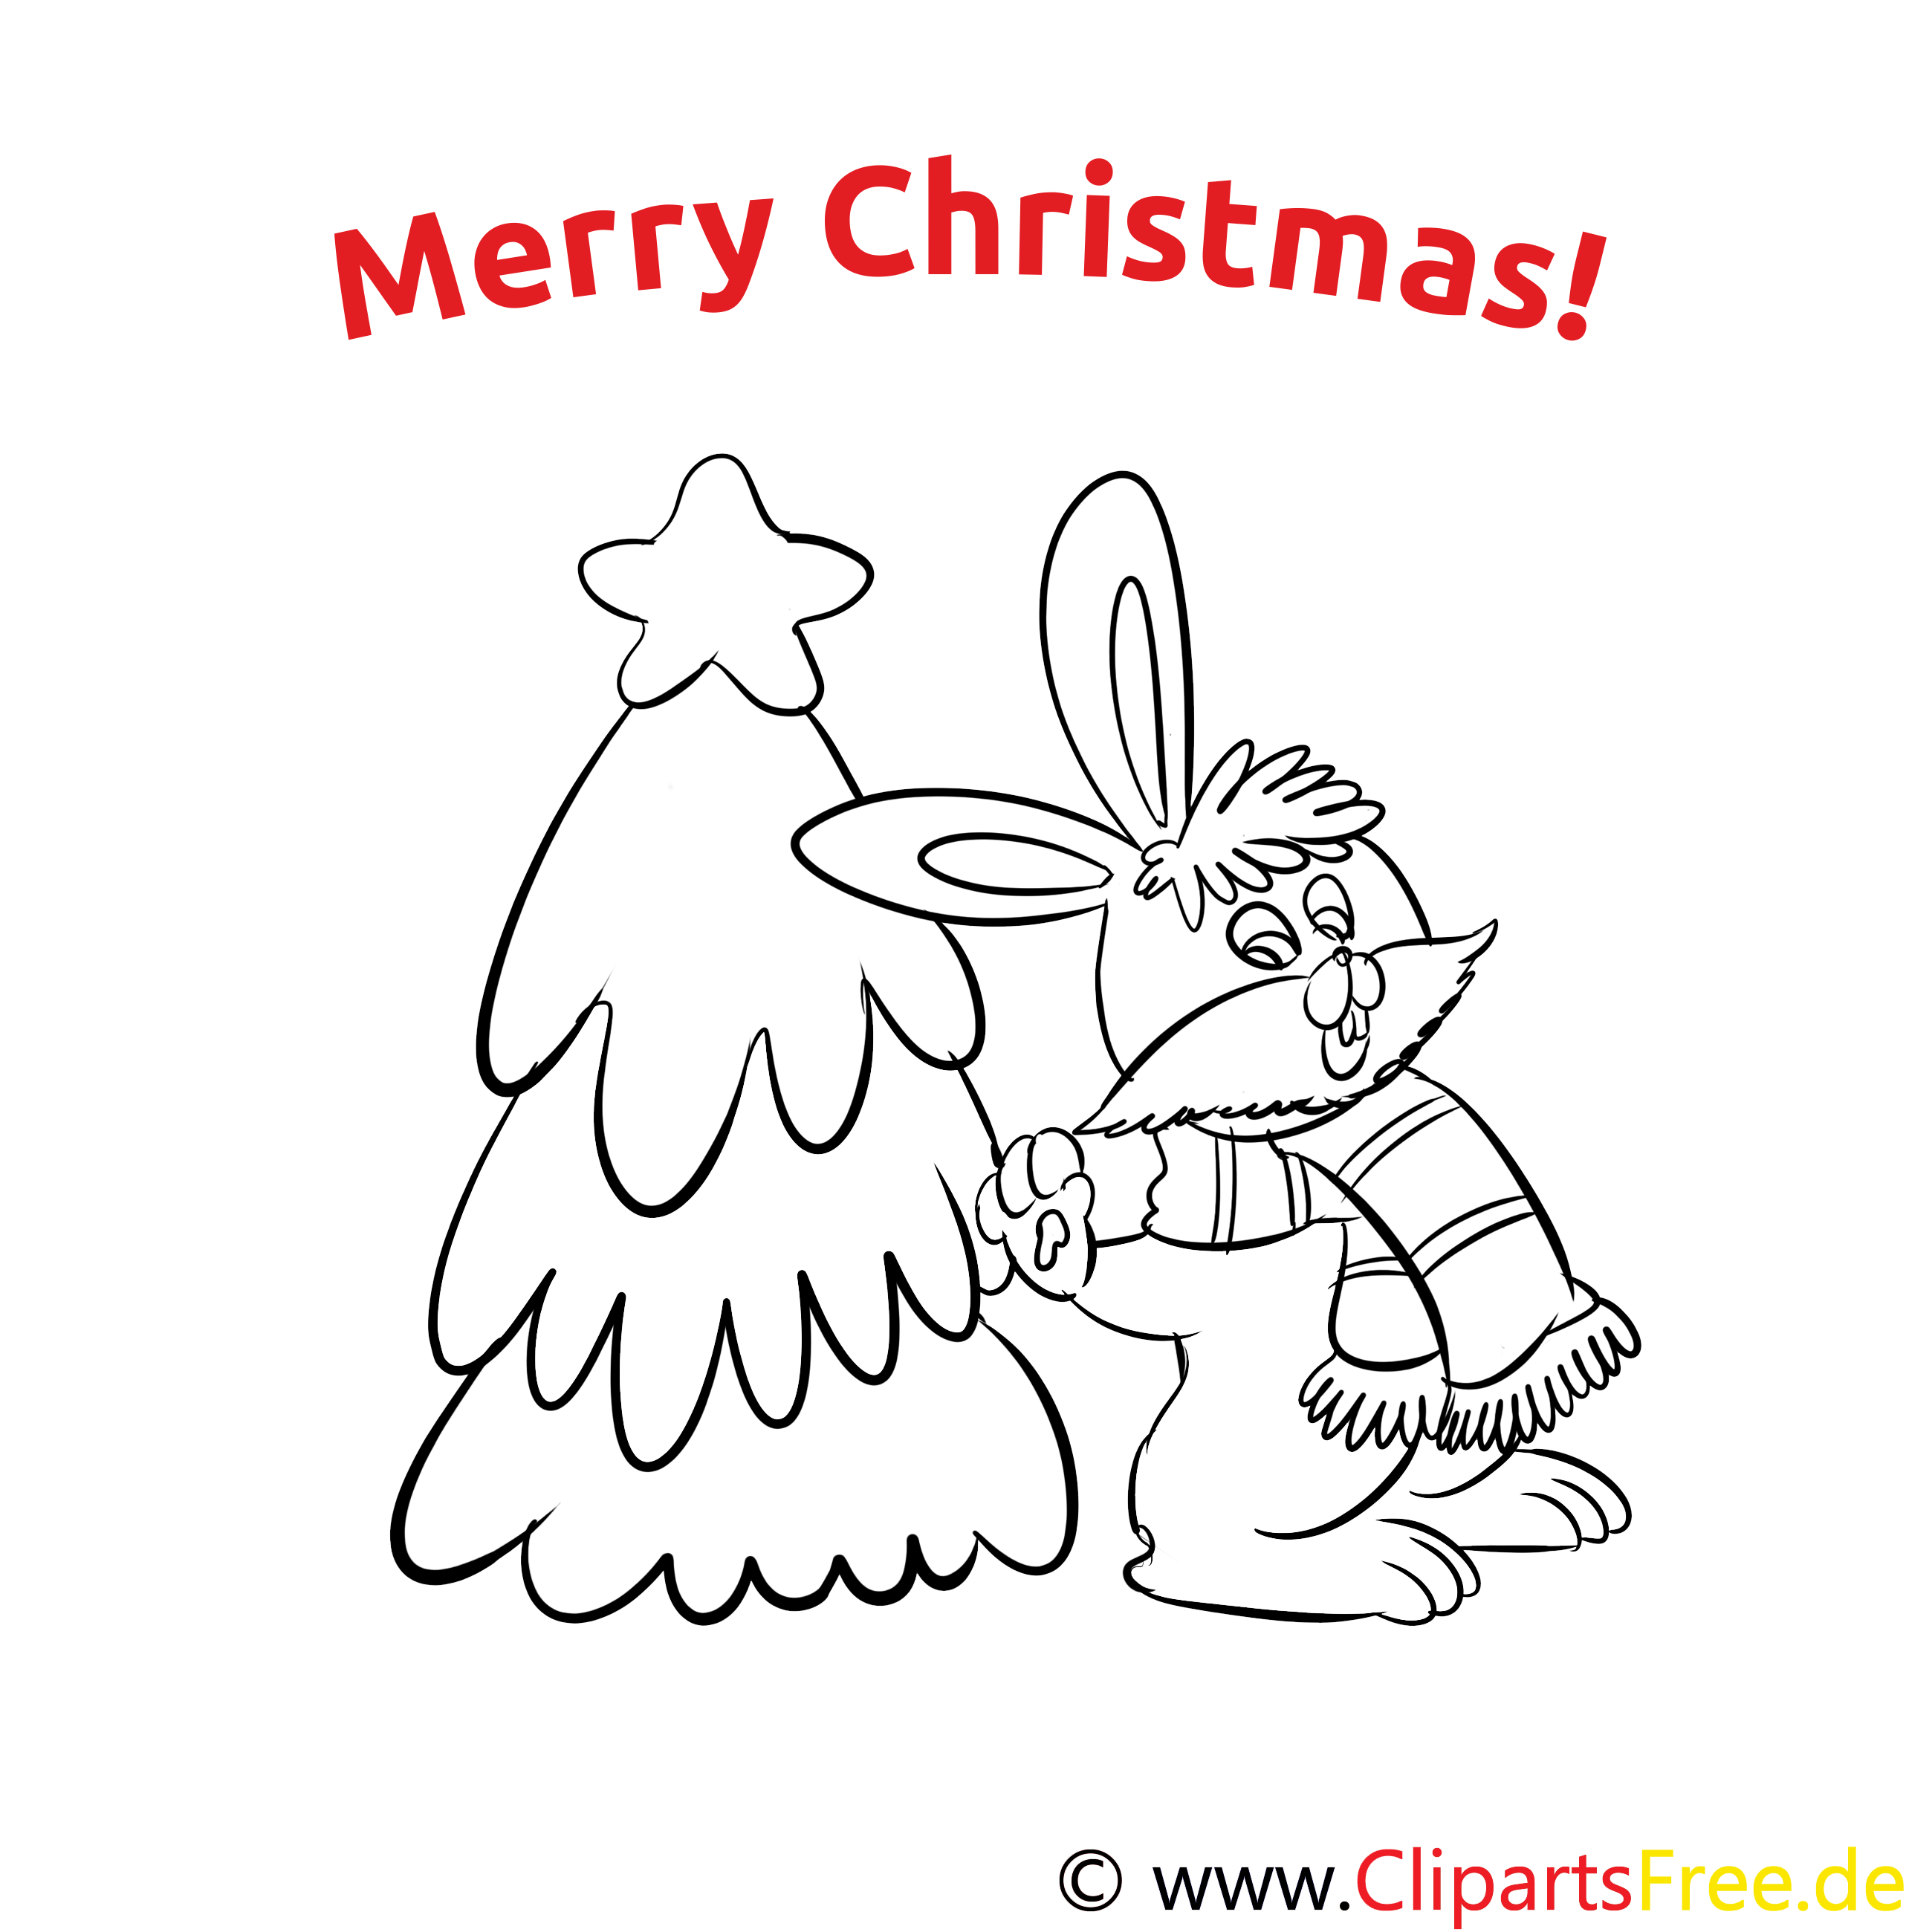 hase weihnachtsbaum merry christmas coloring sheets